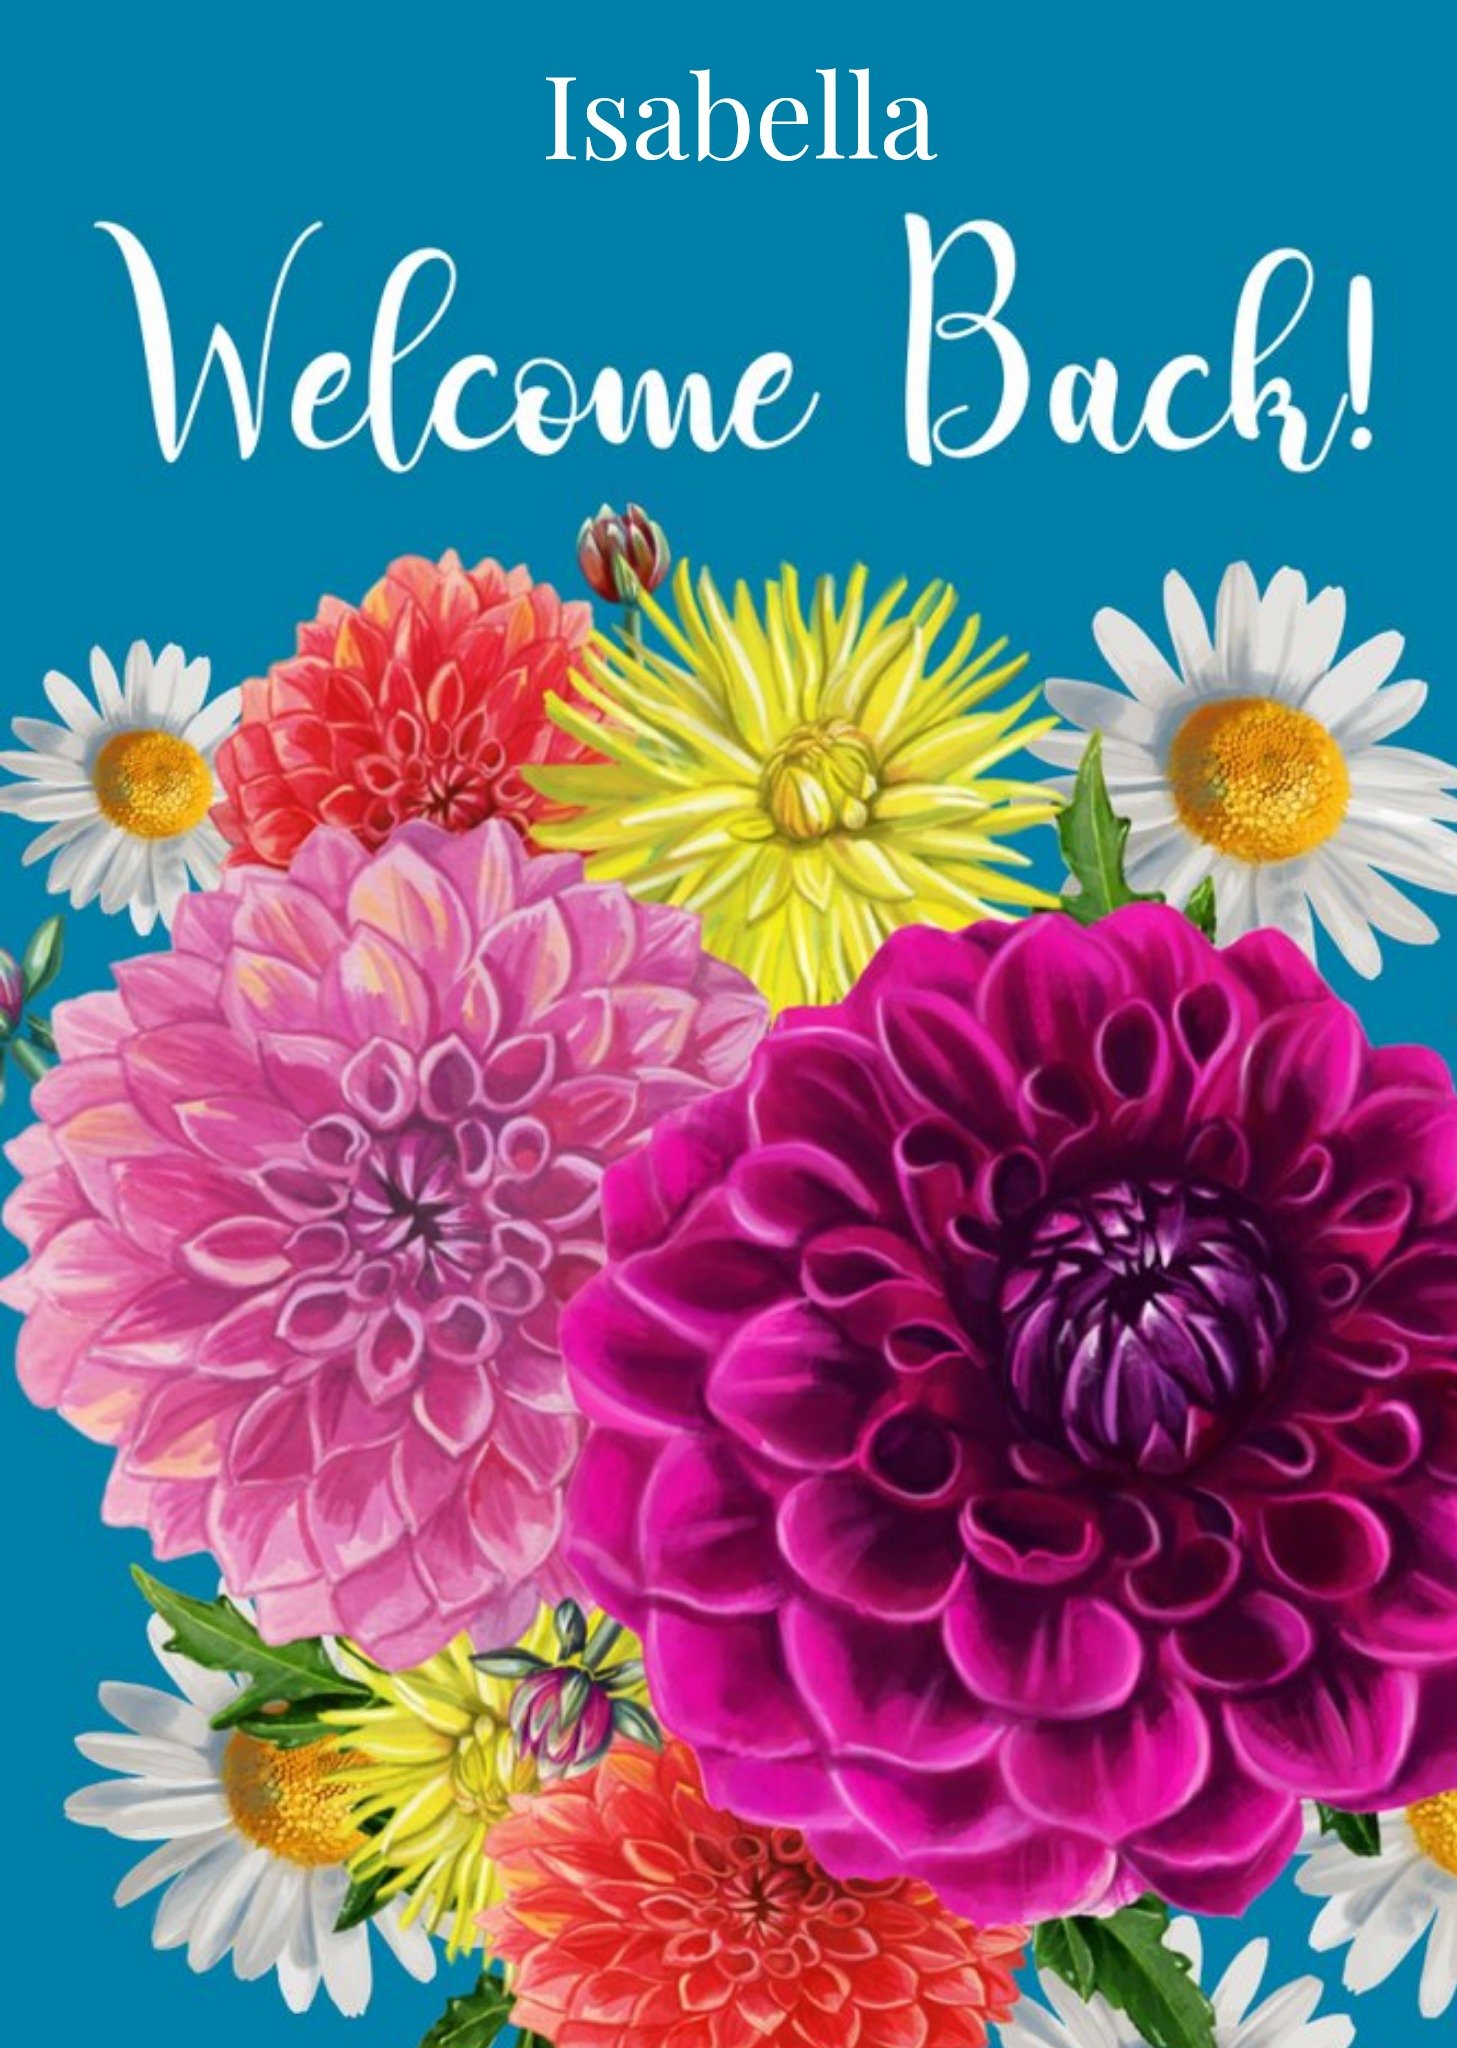 Moonpig Bright Flowers Illustration Customisable Welcome Back Card Ecard